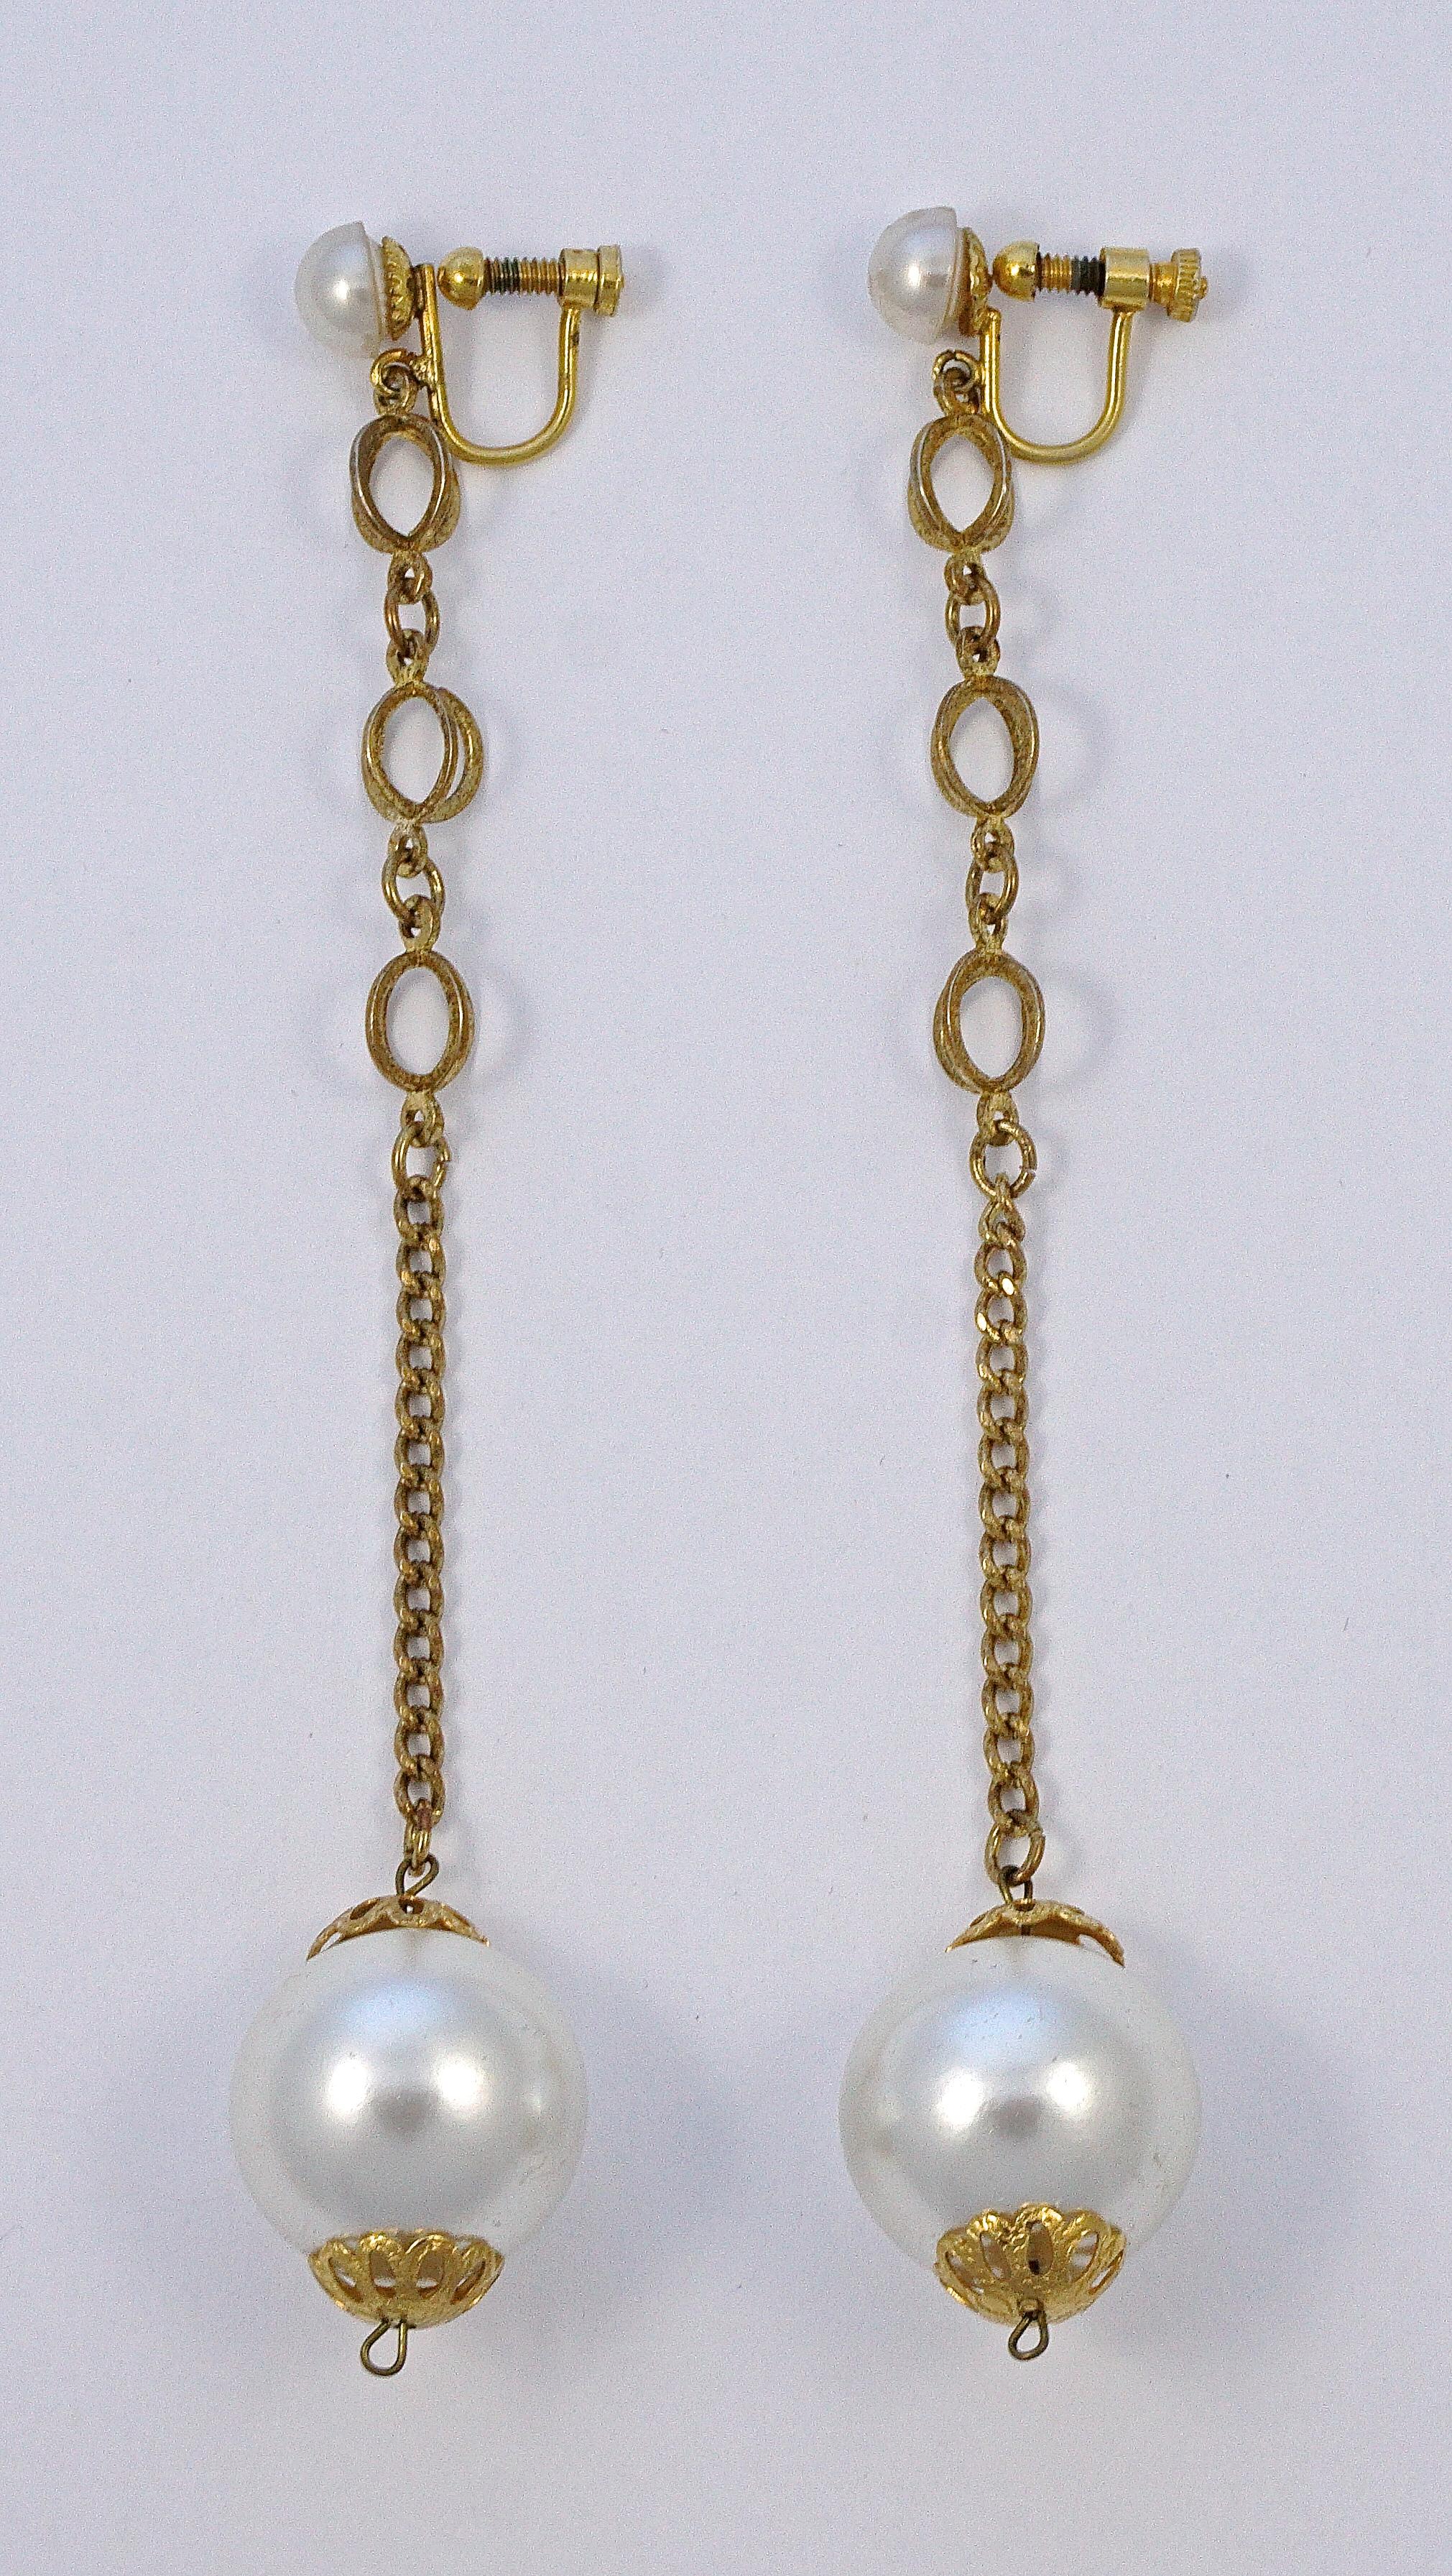 Stylish long gold plated dangle screw back earrings, featuring a circles design, and white faux pearls. Measuring length 12.5cm / 4.92 inches, and the pearls are 1.9cm / .75 inch. There is some wear to the gold plating and faux pearls.

This is a